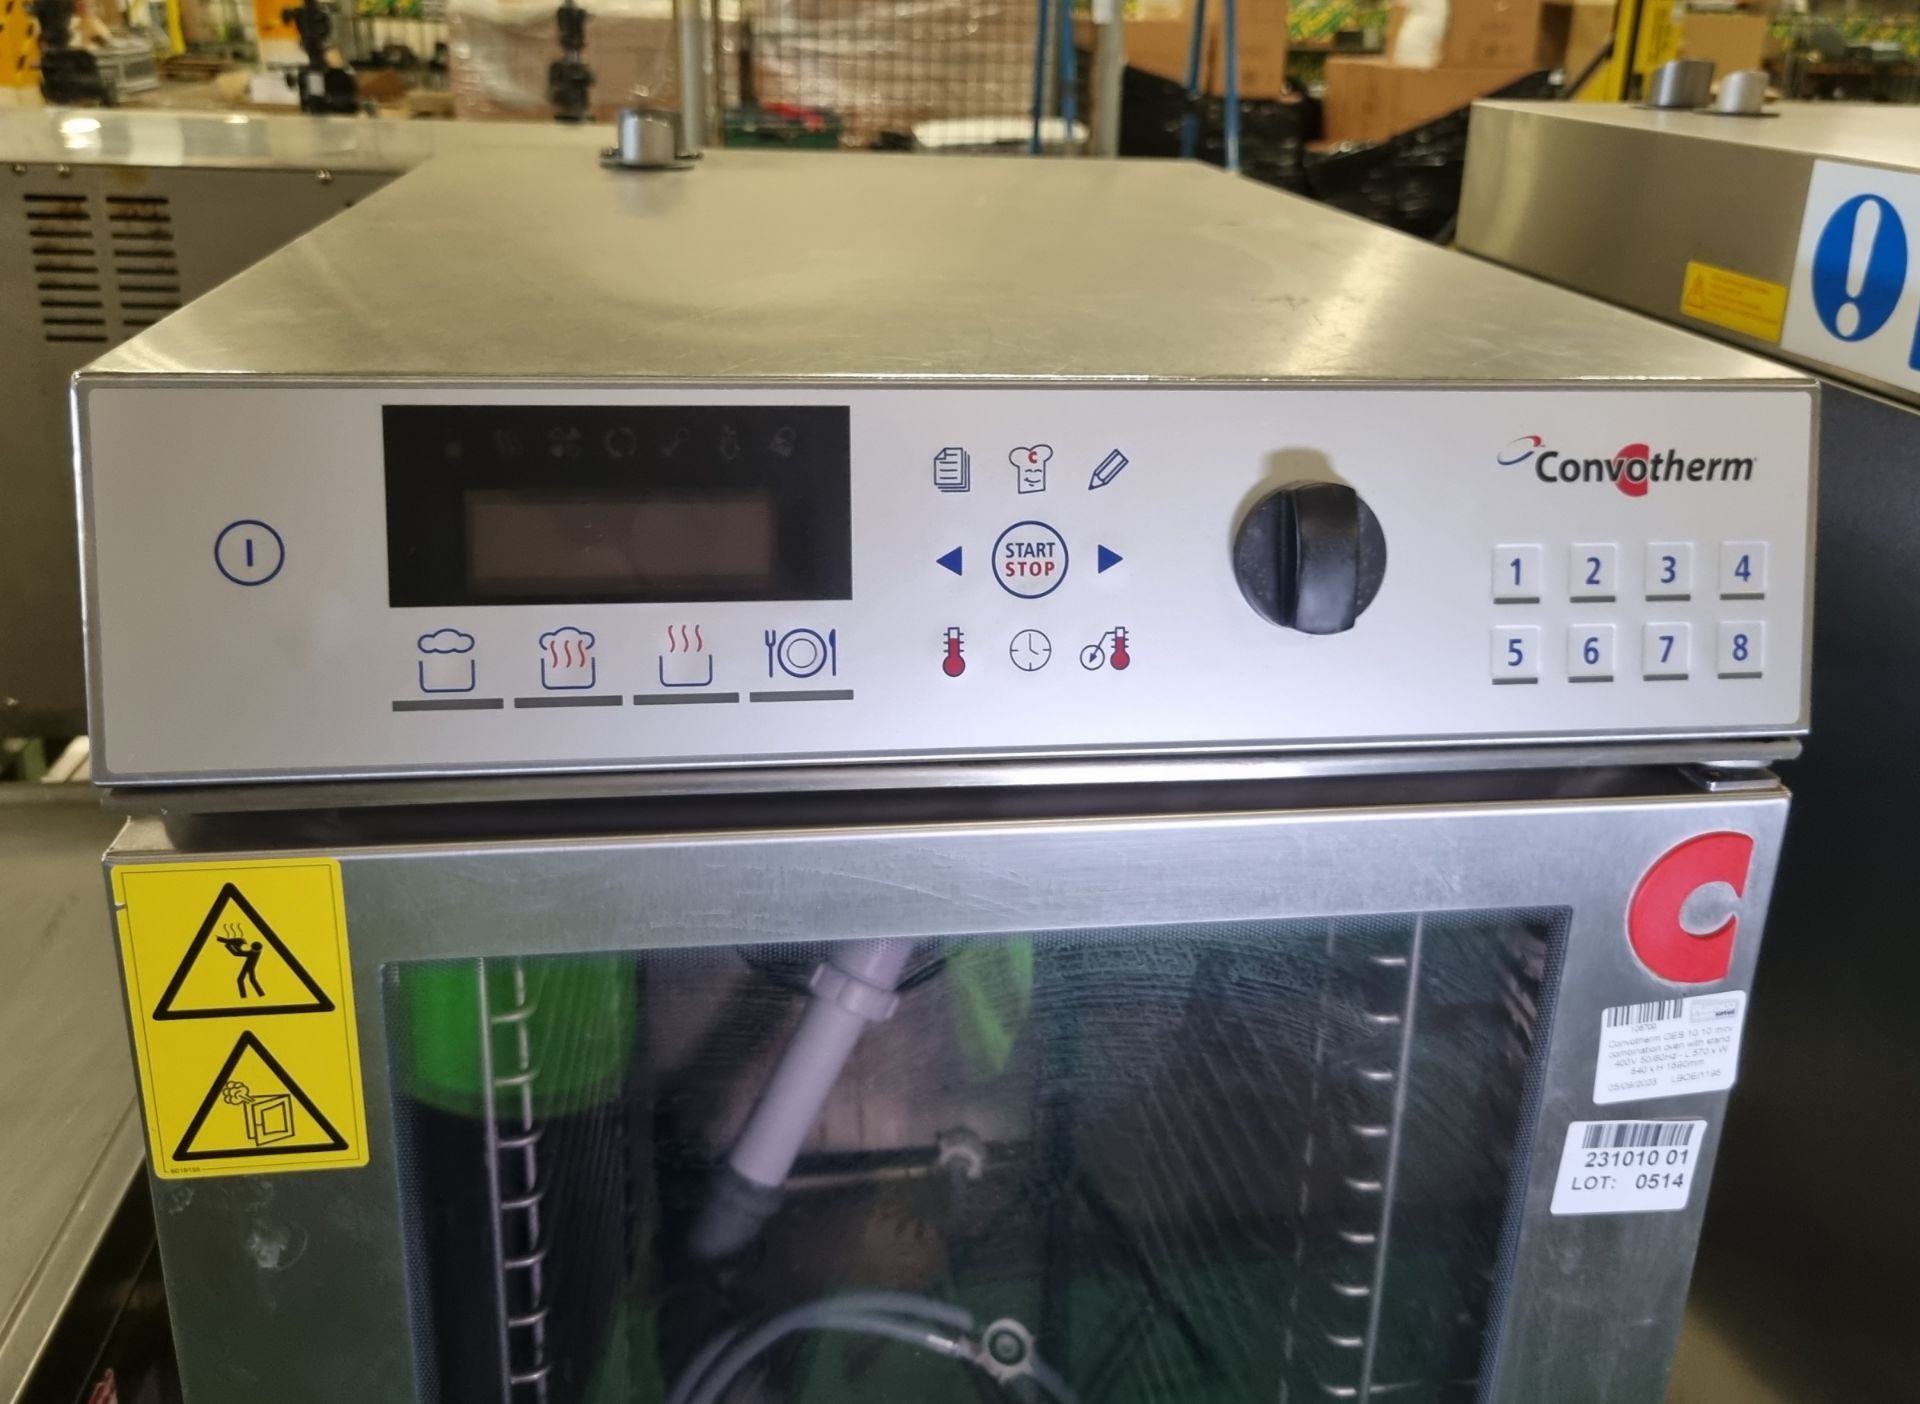 Convotherm OES 10.10 mini combination oven with stand - 400V 50/60Hz - L 570 x W 840 x H 1590mm - Image 3 of 5